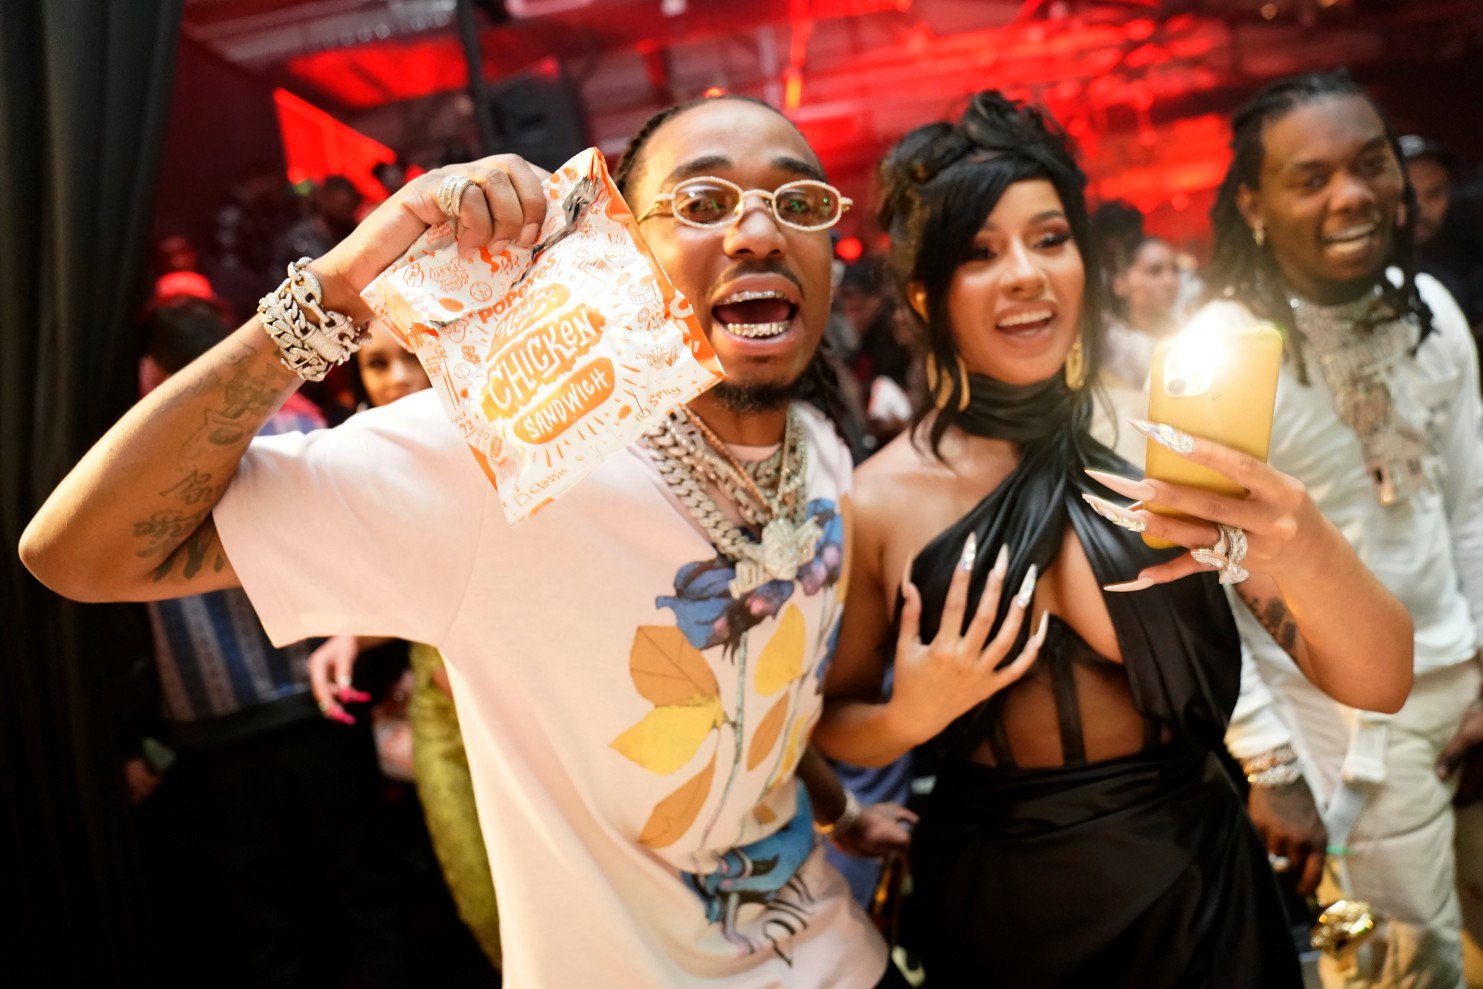 17 Of The Wildest Celebrity Parties Ever FandomWire